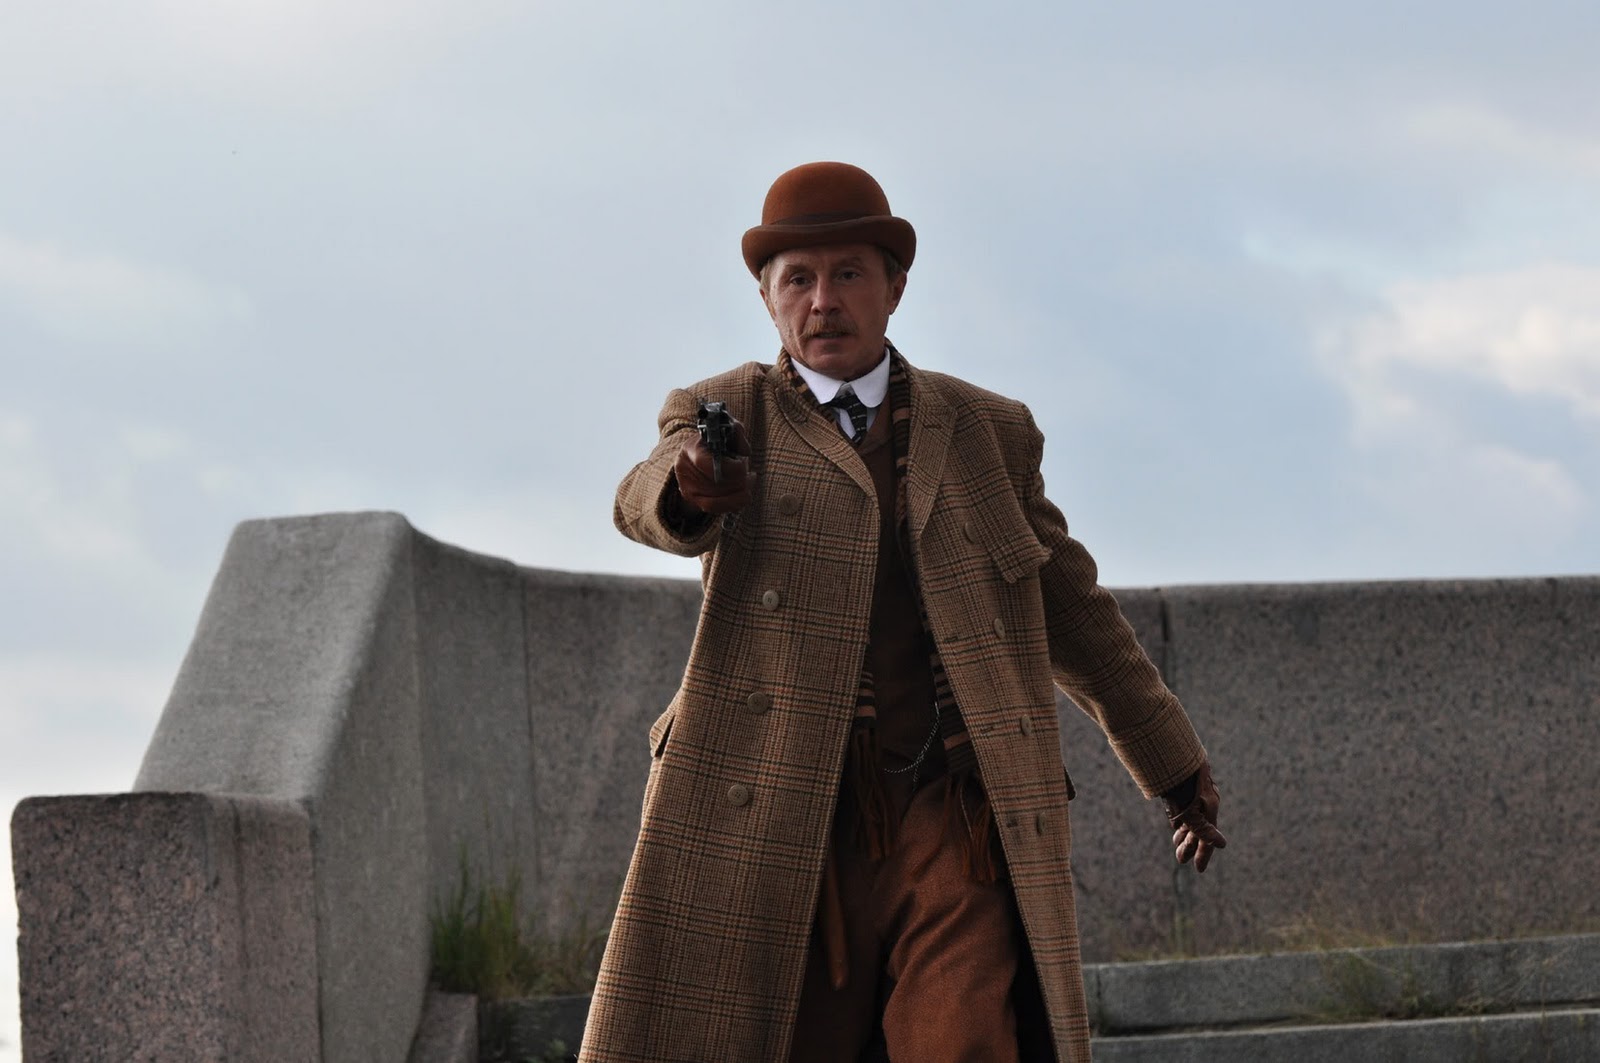 Andrei Panin as Dr Watson in <i>221b Baker Street</i>, the latest Russian version of the Holmes stories